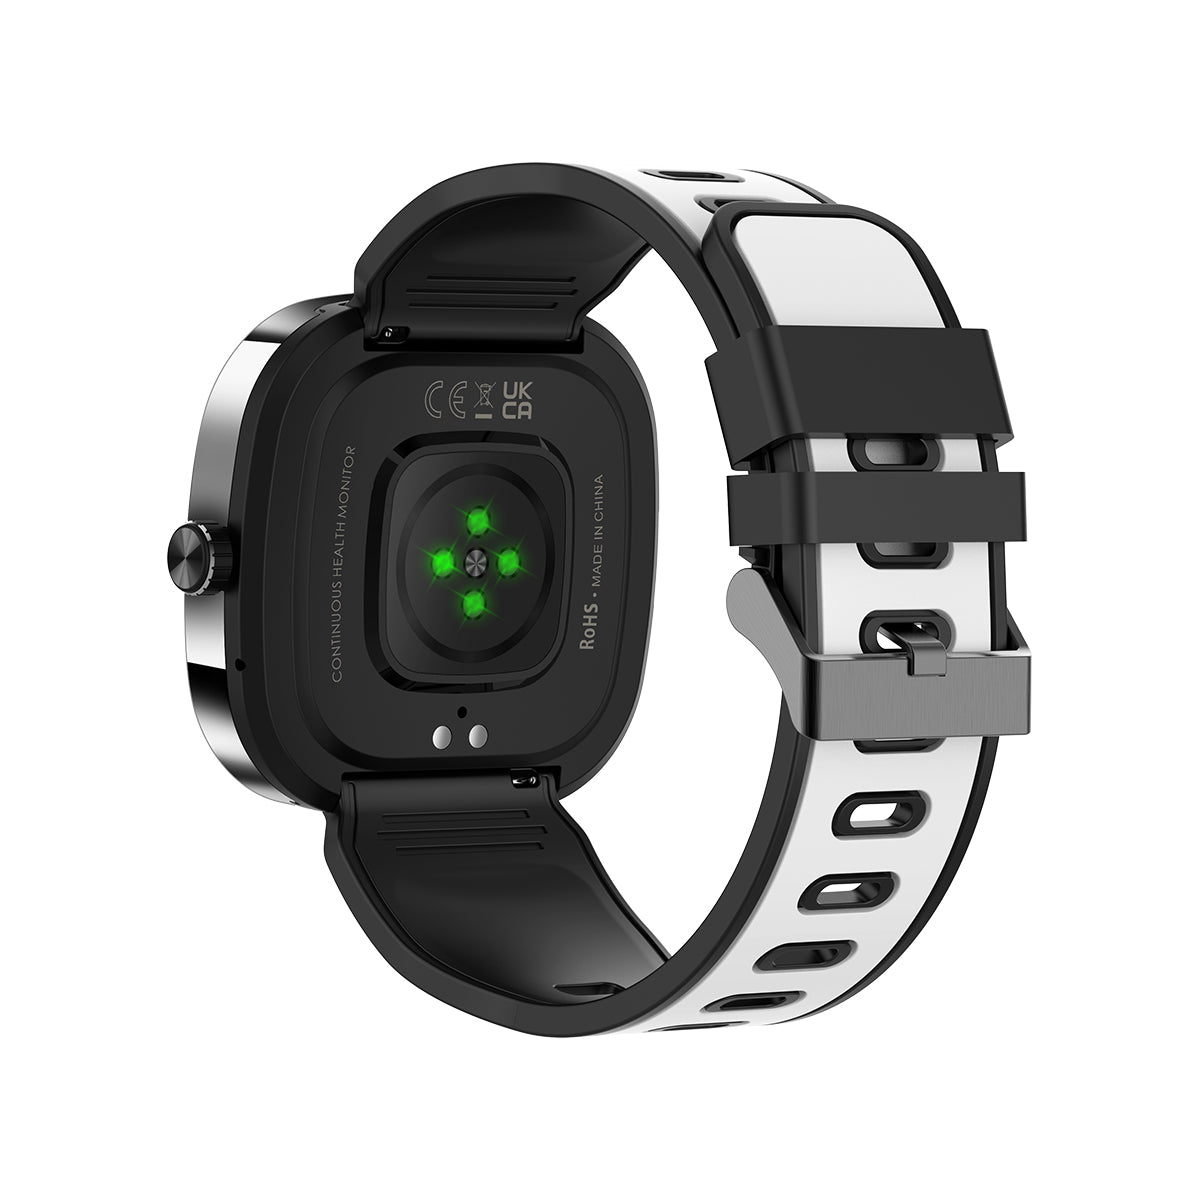 Doogee's latest rugged phone sports smartwatch-like second screen